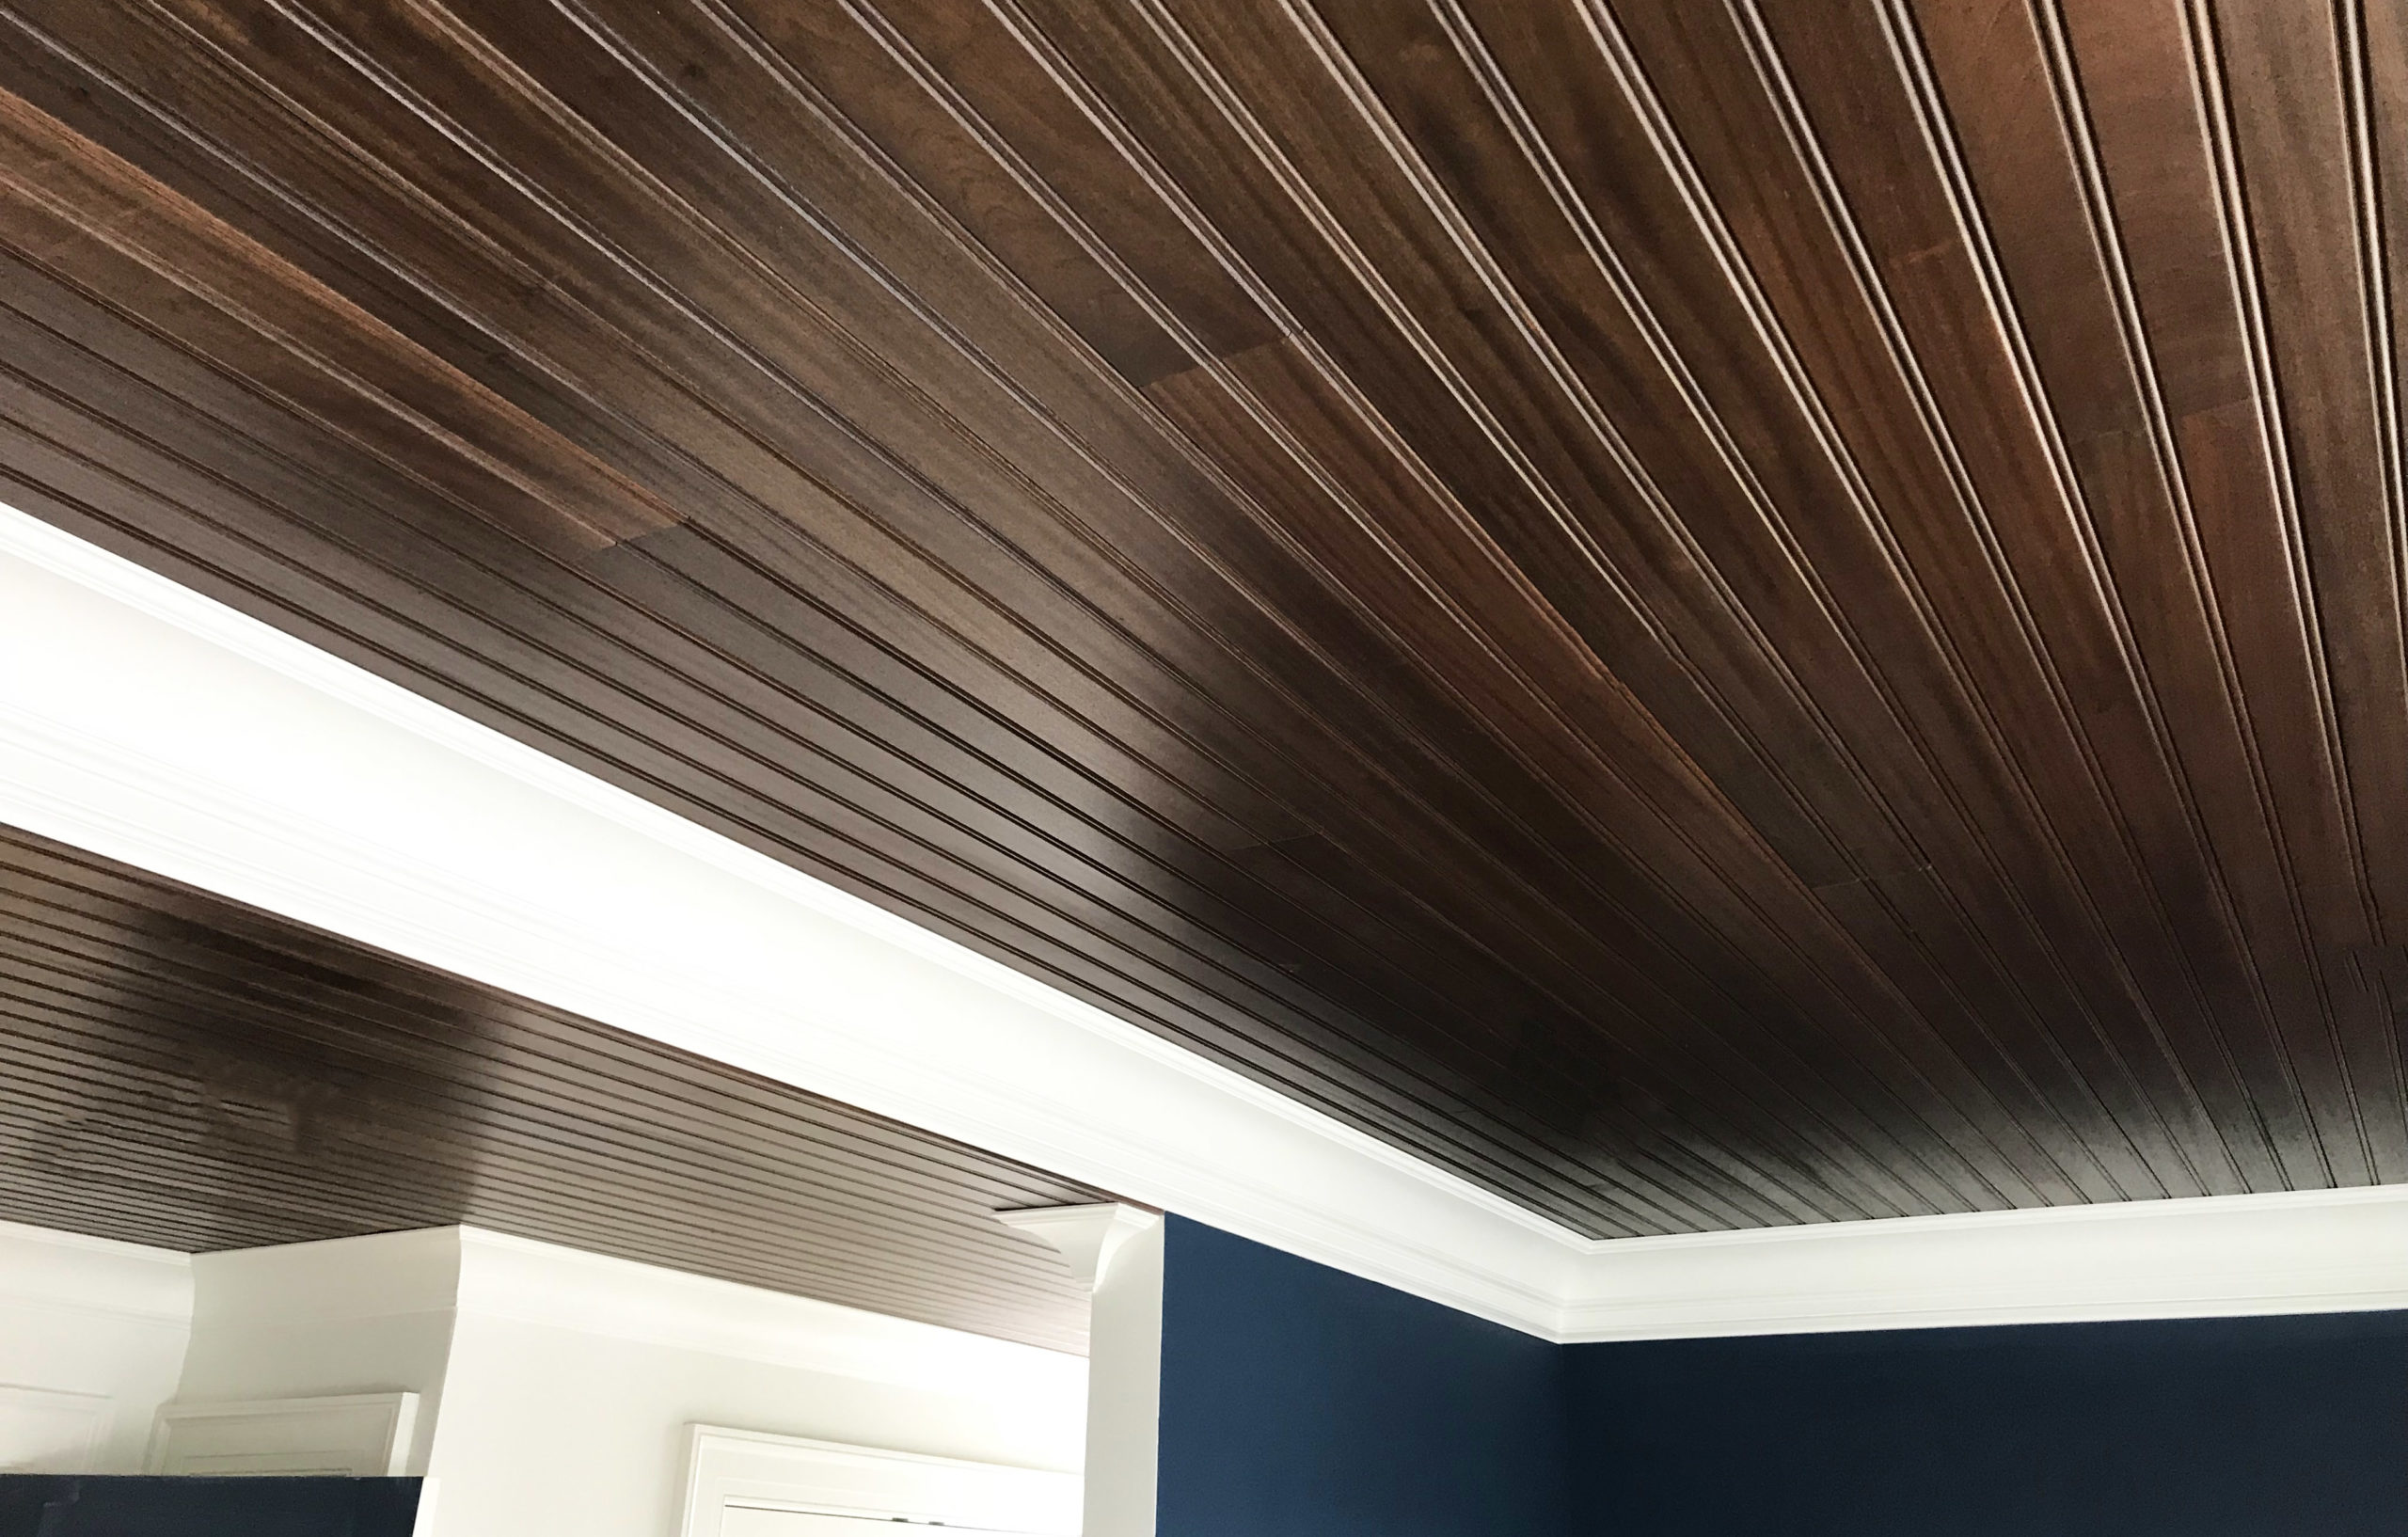 Sapele tongue and groove ceiling